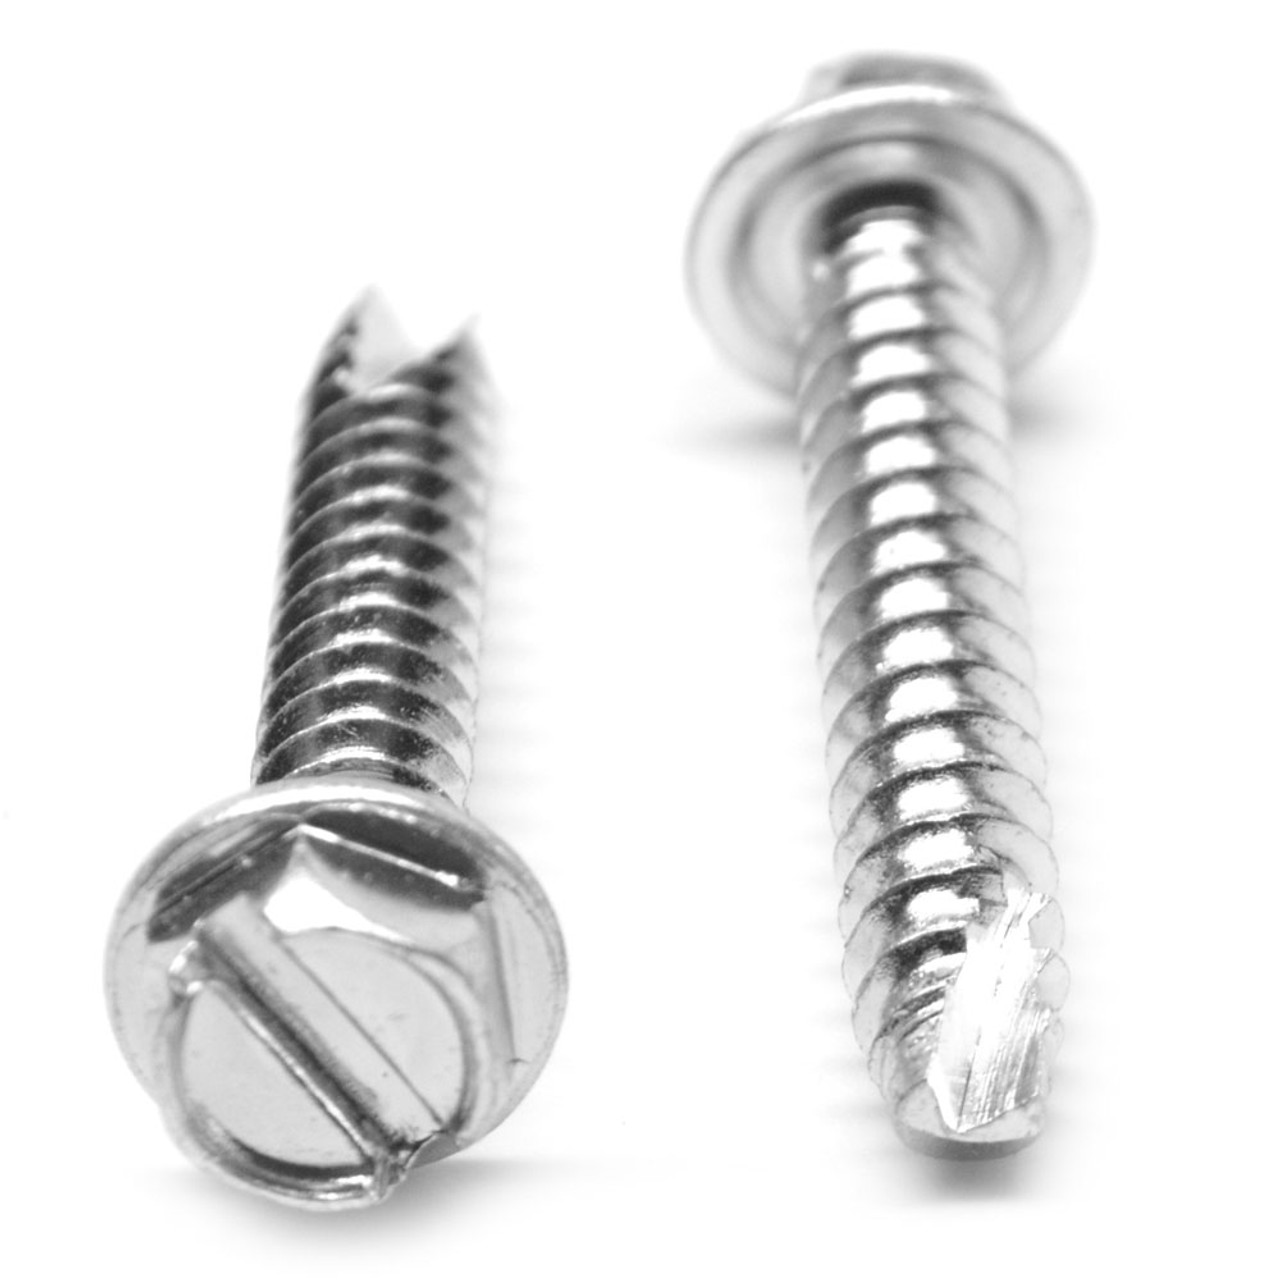 #8-18 x 1" (FT) Thread Cutting Screw Slotted Hex Washer Head Type 25 Low Carbon Steel Zinc Plated